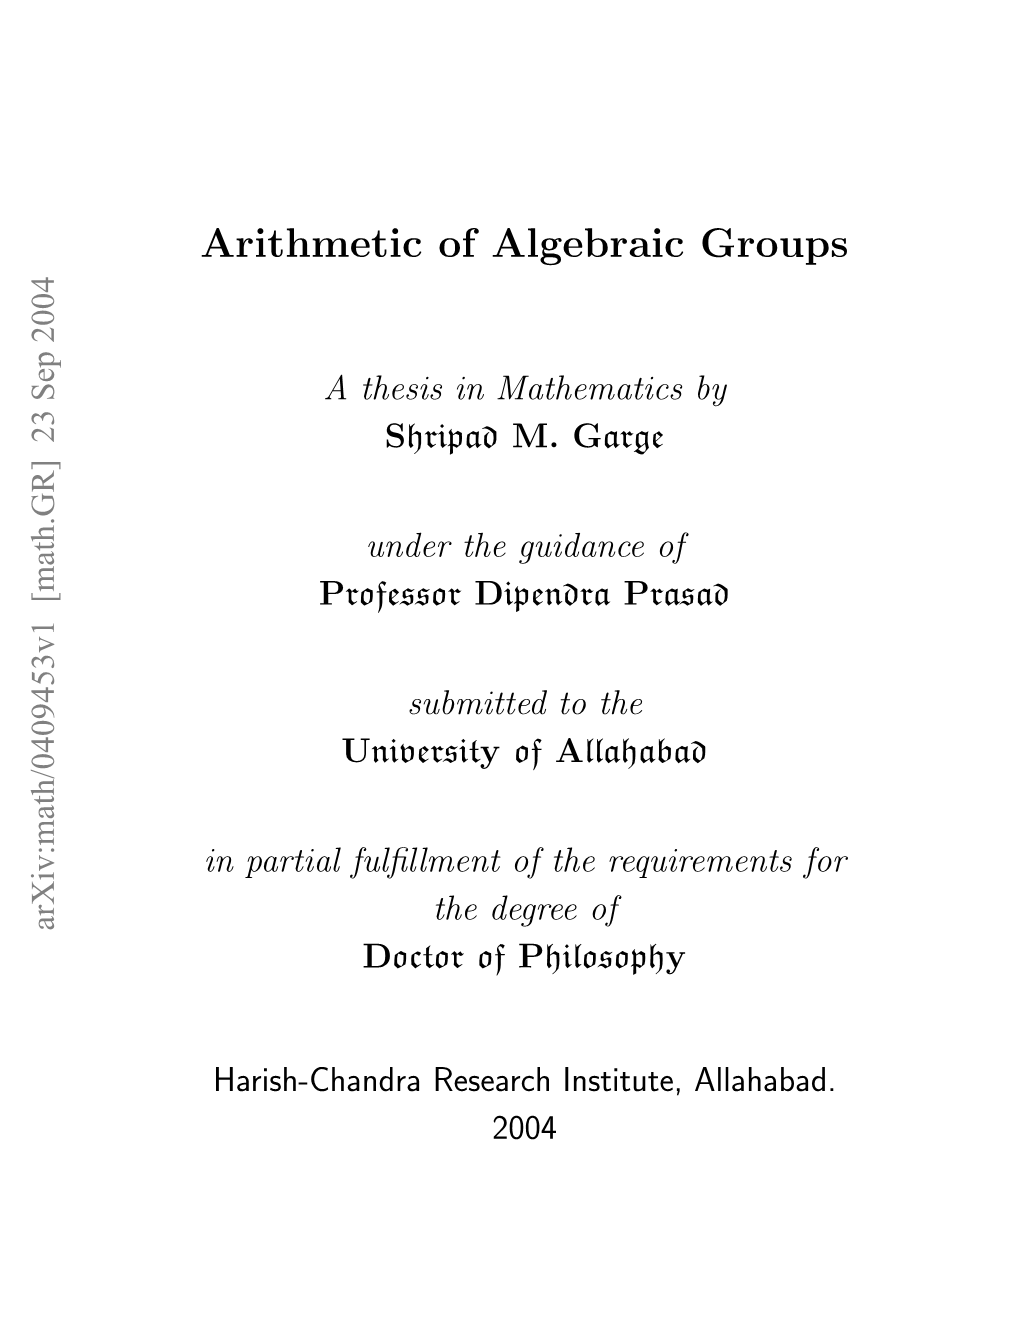 Arithmetic of Algebraic Groups” Submitted by Shripad M